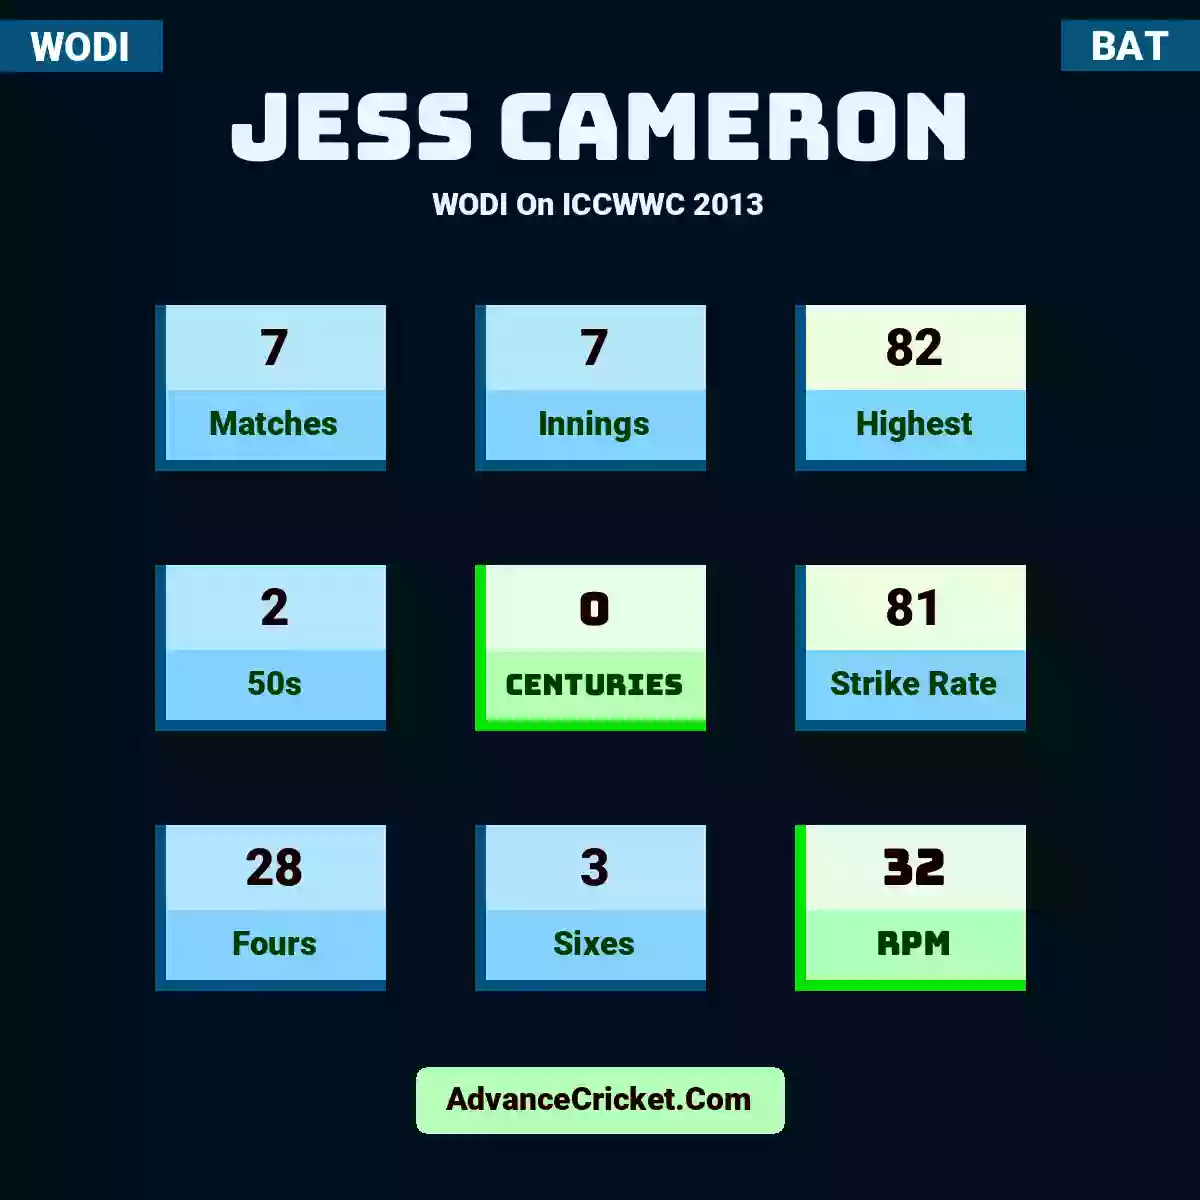 Jess Cameron WODI  On ICCWWC 2013, Jess Cameron played 7 matches, scored 82 runs as highest, 2 half-centuries, and 0 centuries, with a strike rate of 81. J.Cameron hit 28 fours and 3 sixes, with an RPM of 32.